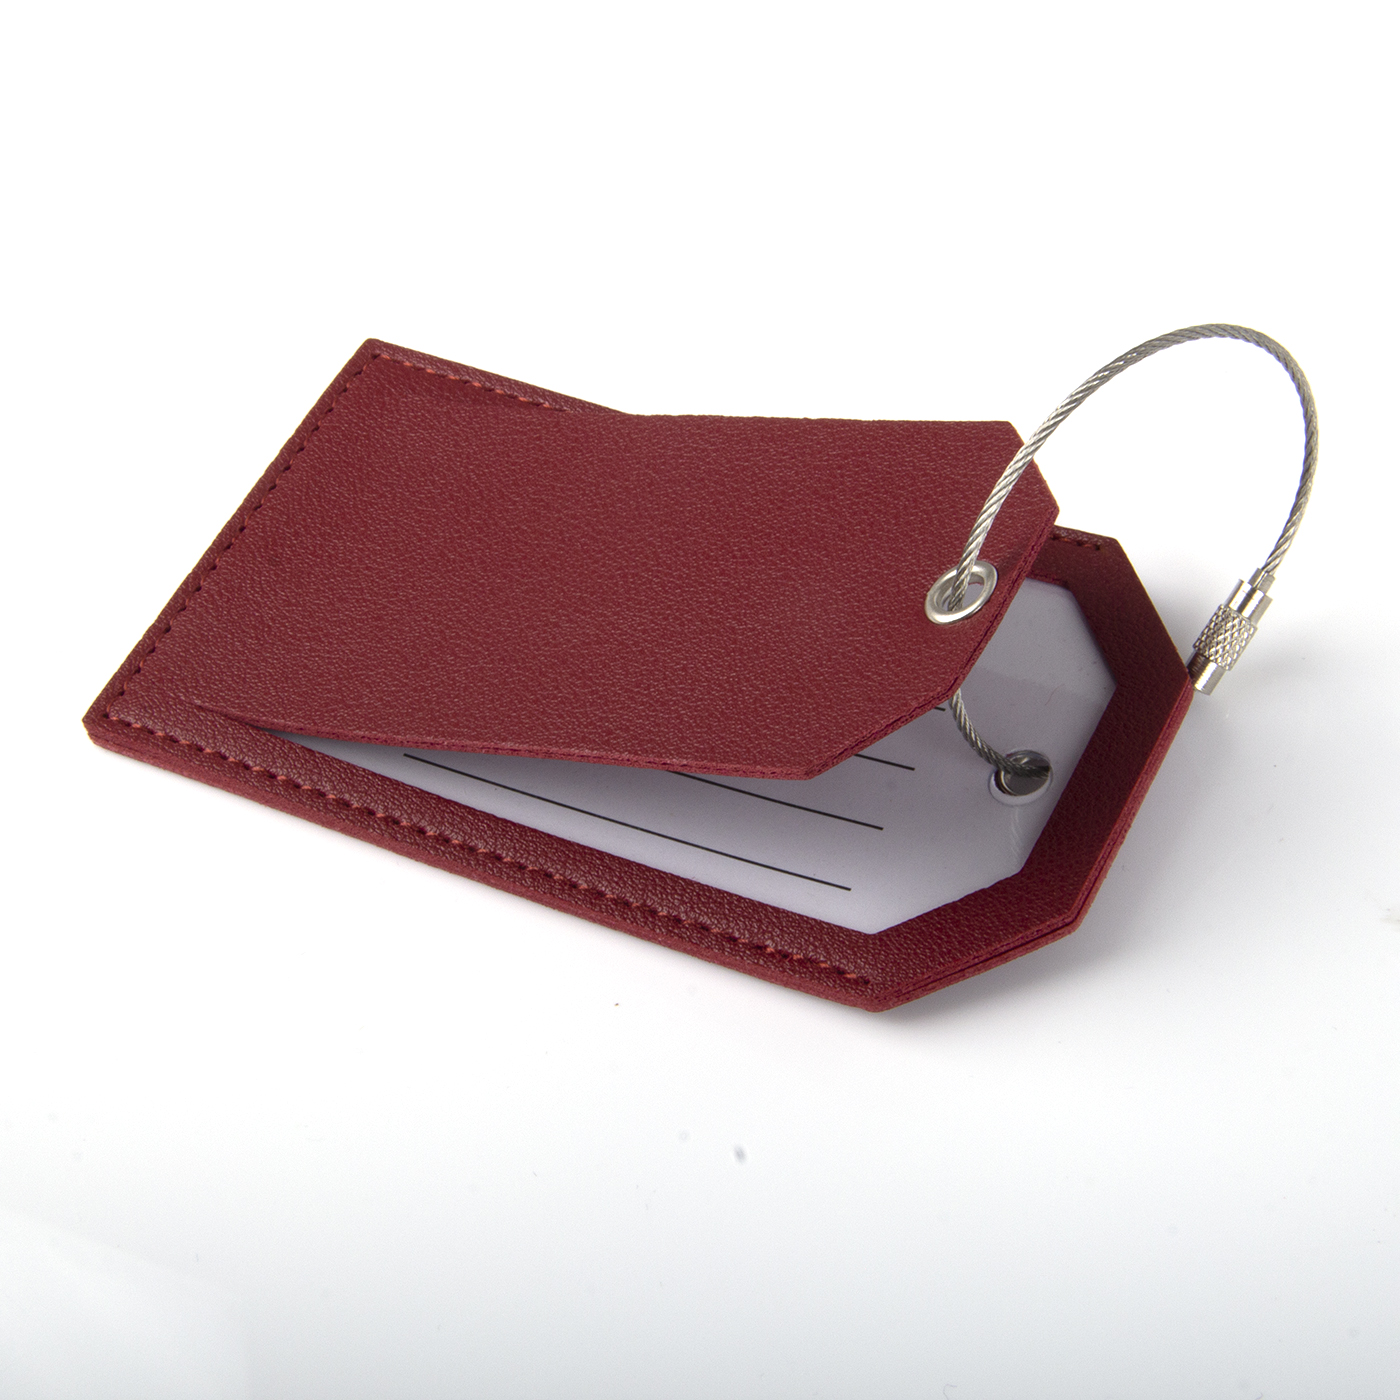 Luggage Tag With Full Privacy Cover And Steel Loop2